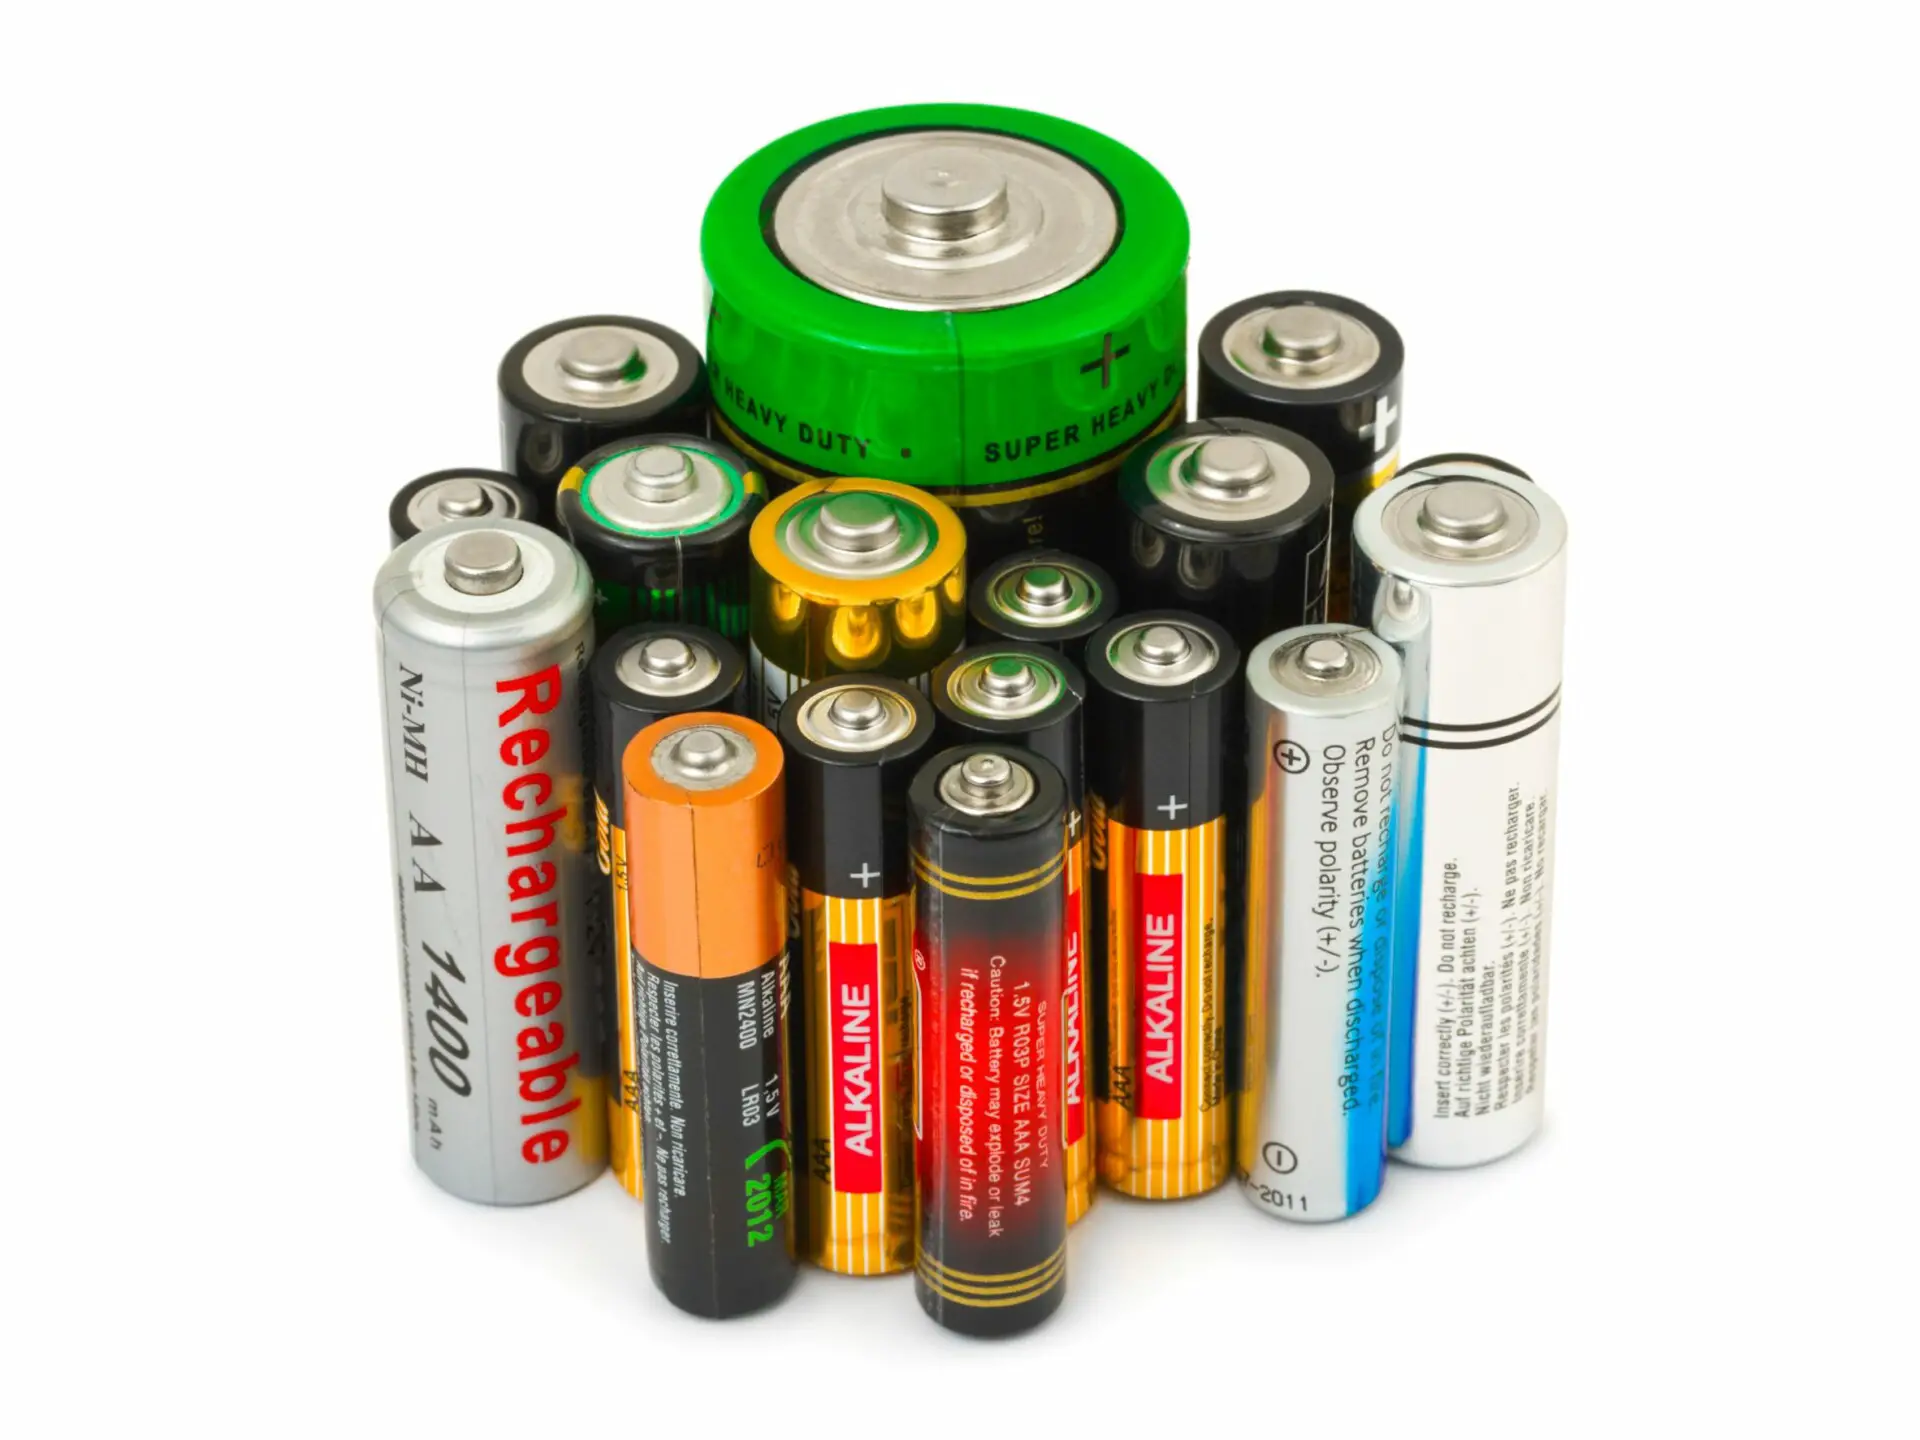 Are Alkaline Batteries Bad for the Environment? (9 Answers)